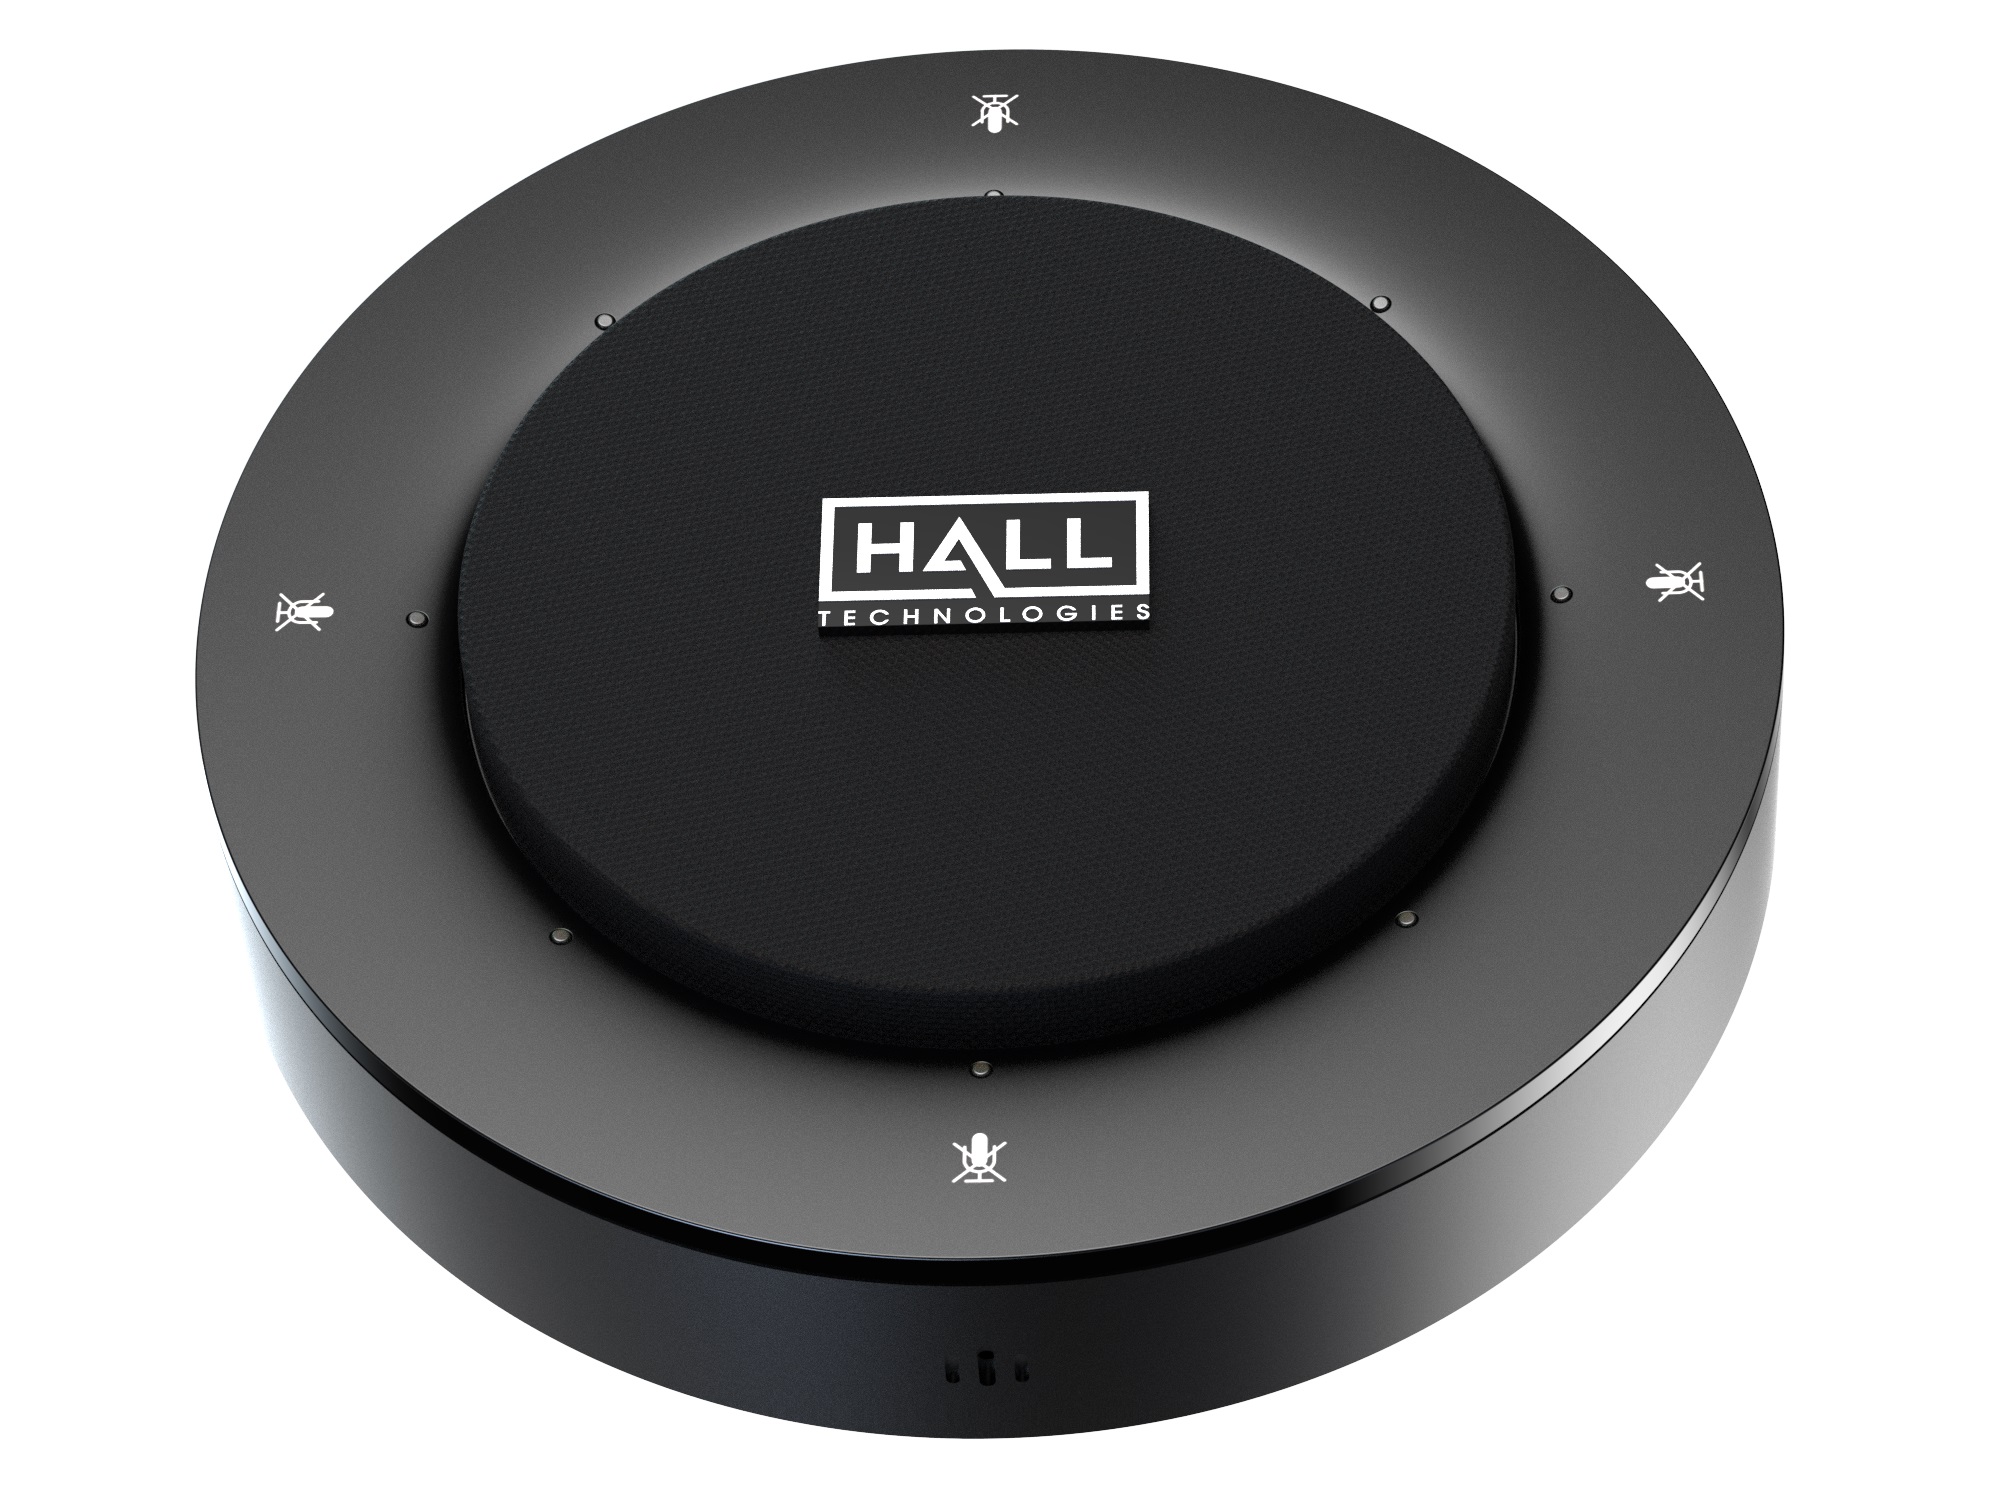 HT-SATELLITE-EXT Add-On Microphone for the Mercury Video Bar by Hall Technologies